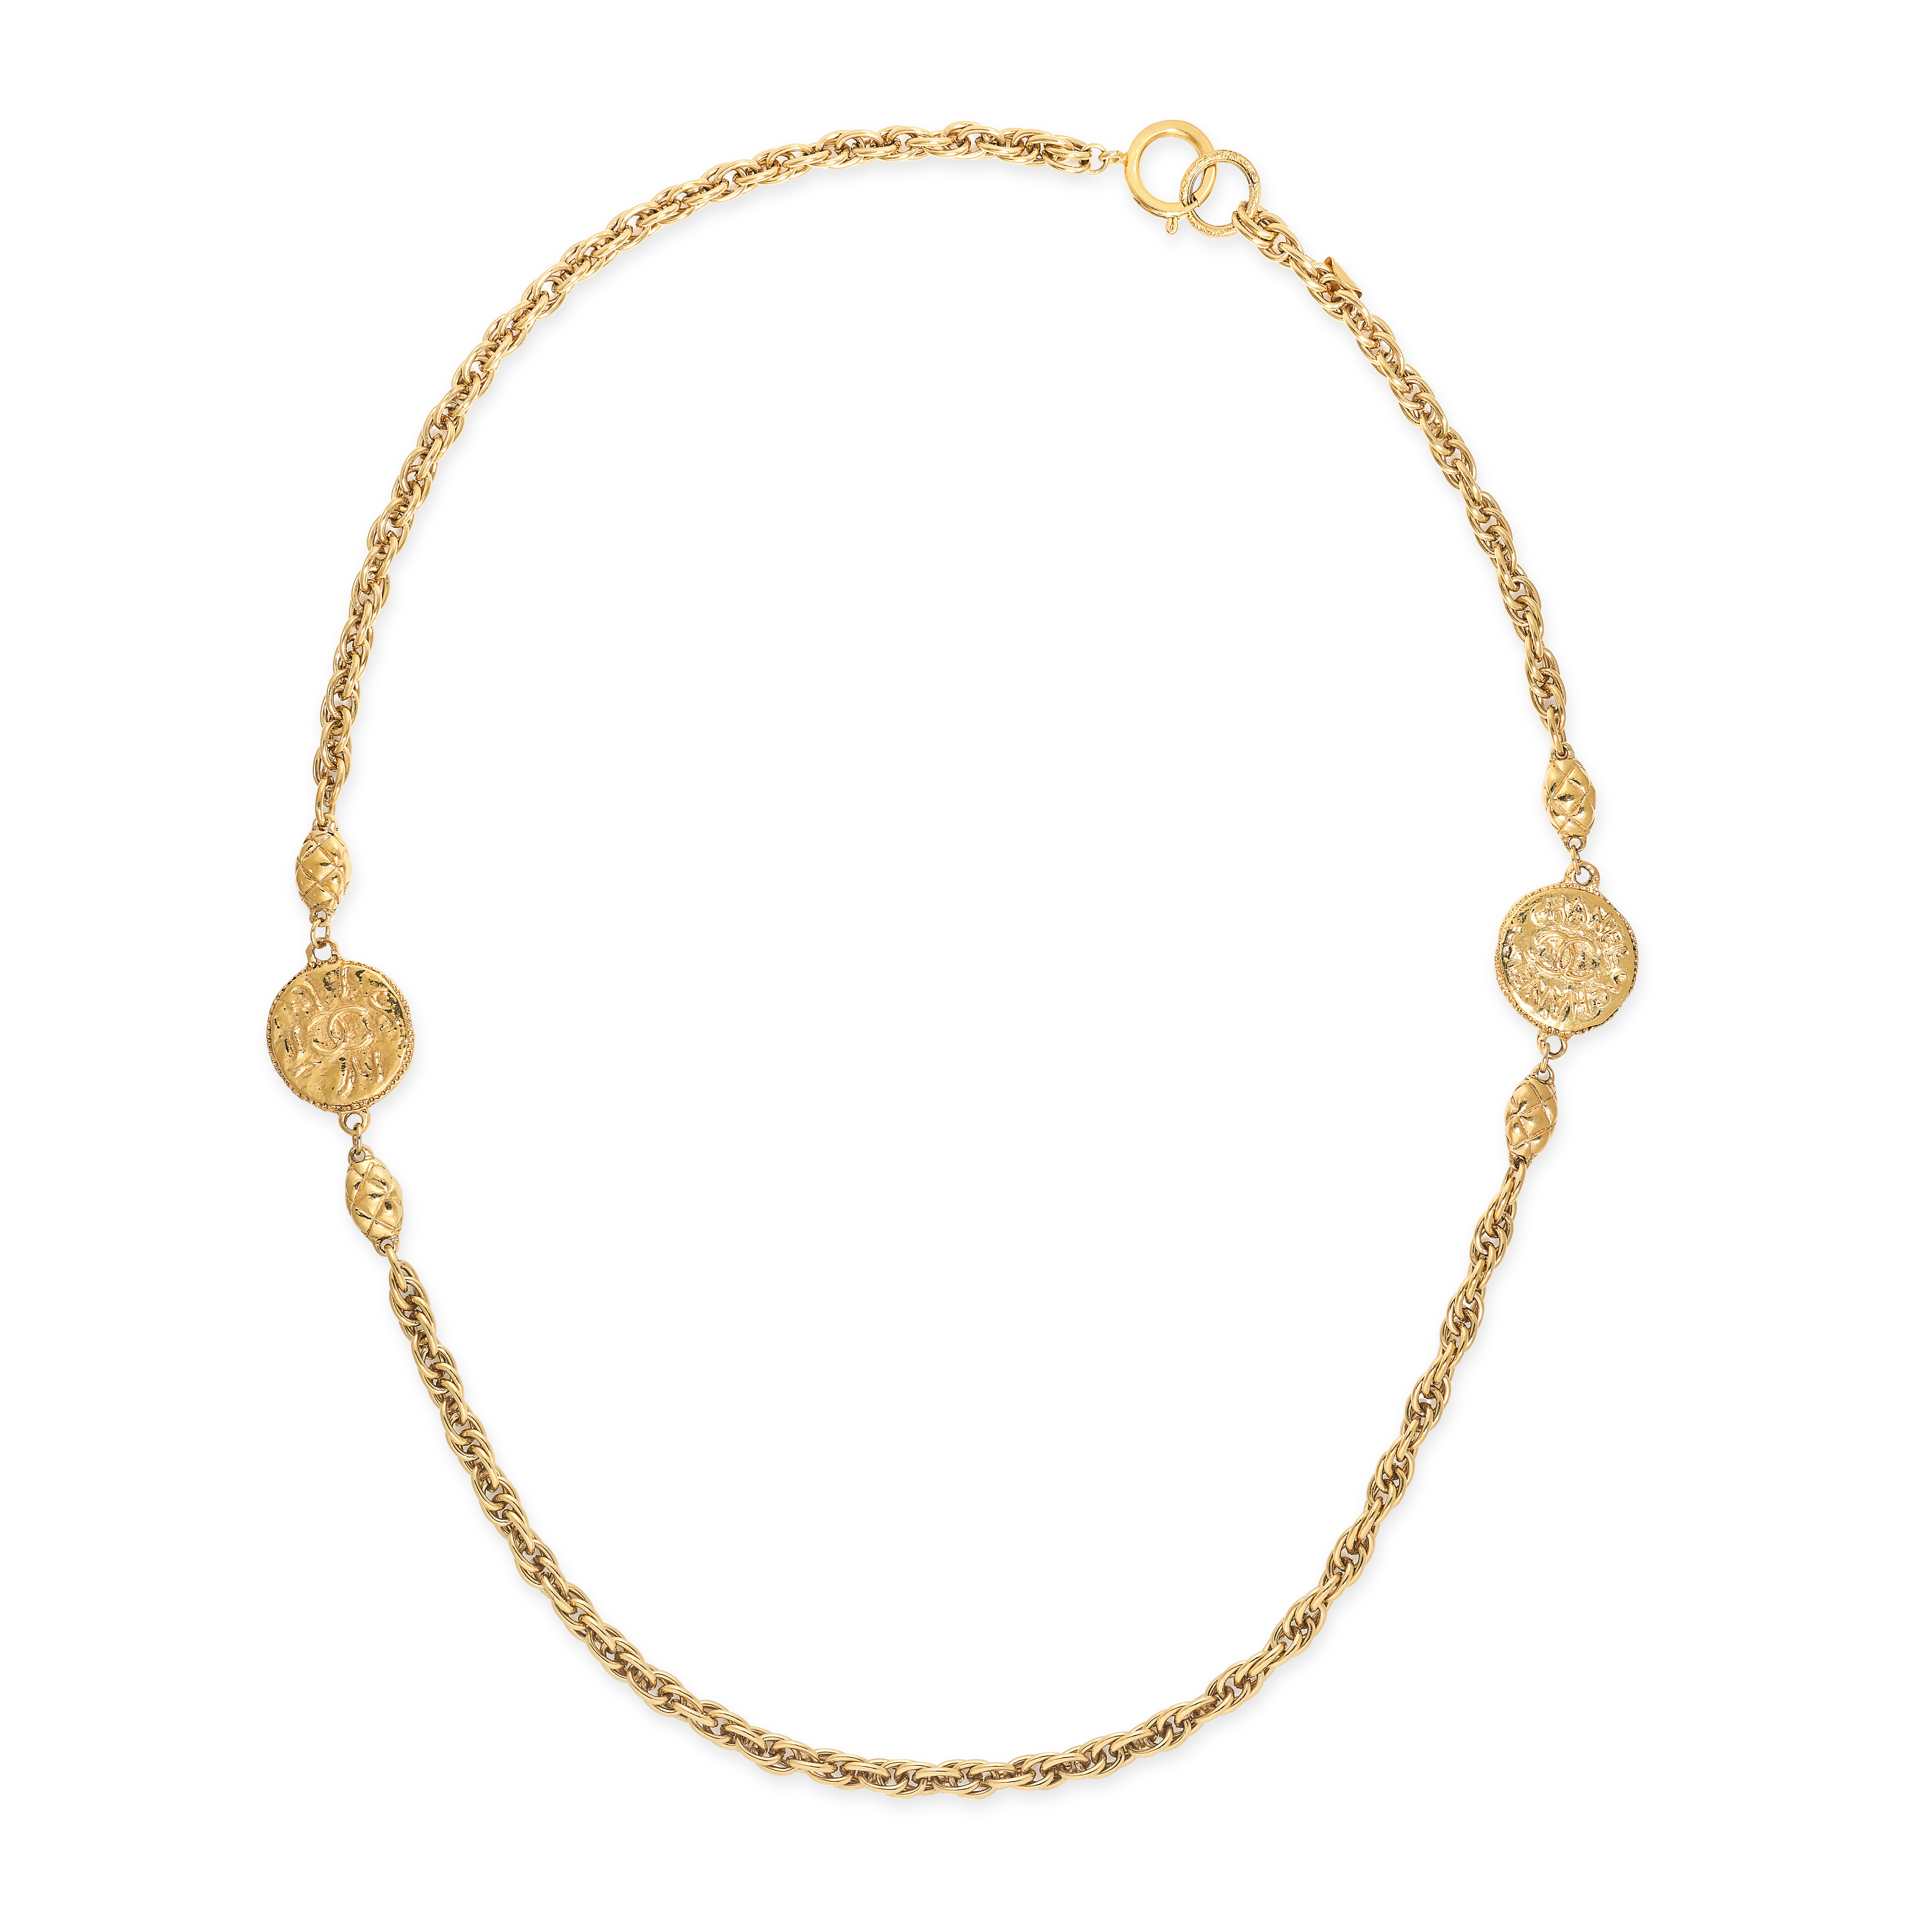 CHANEL, A VINTAGE FANCY LINK NECKLACE in gold plate, set with two Chanel motif disks between link...